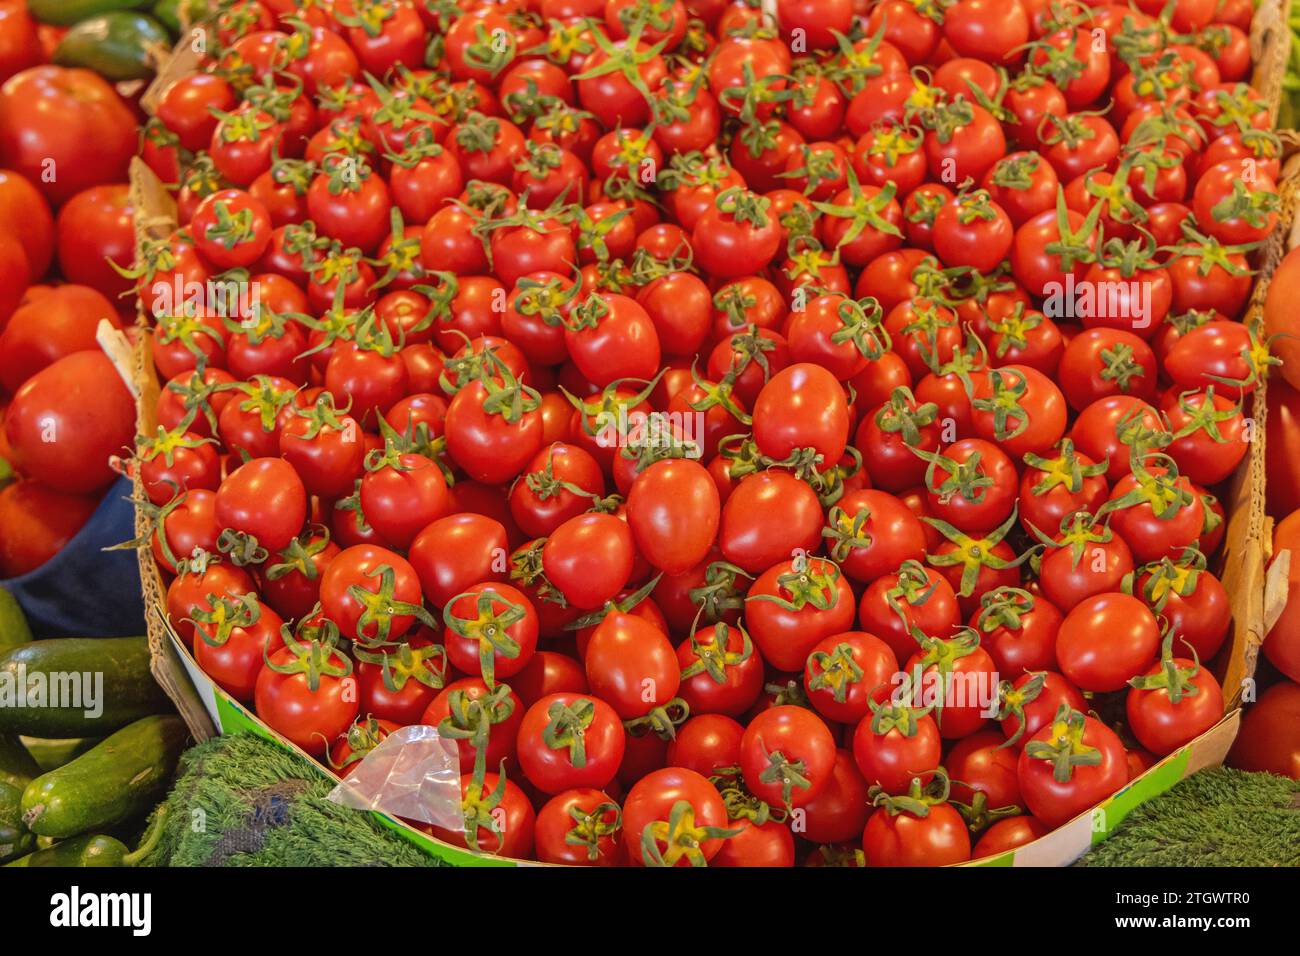 Big Bunch of Red Cherry Tomato at Farmers Market Stock Photo